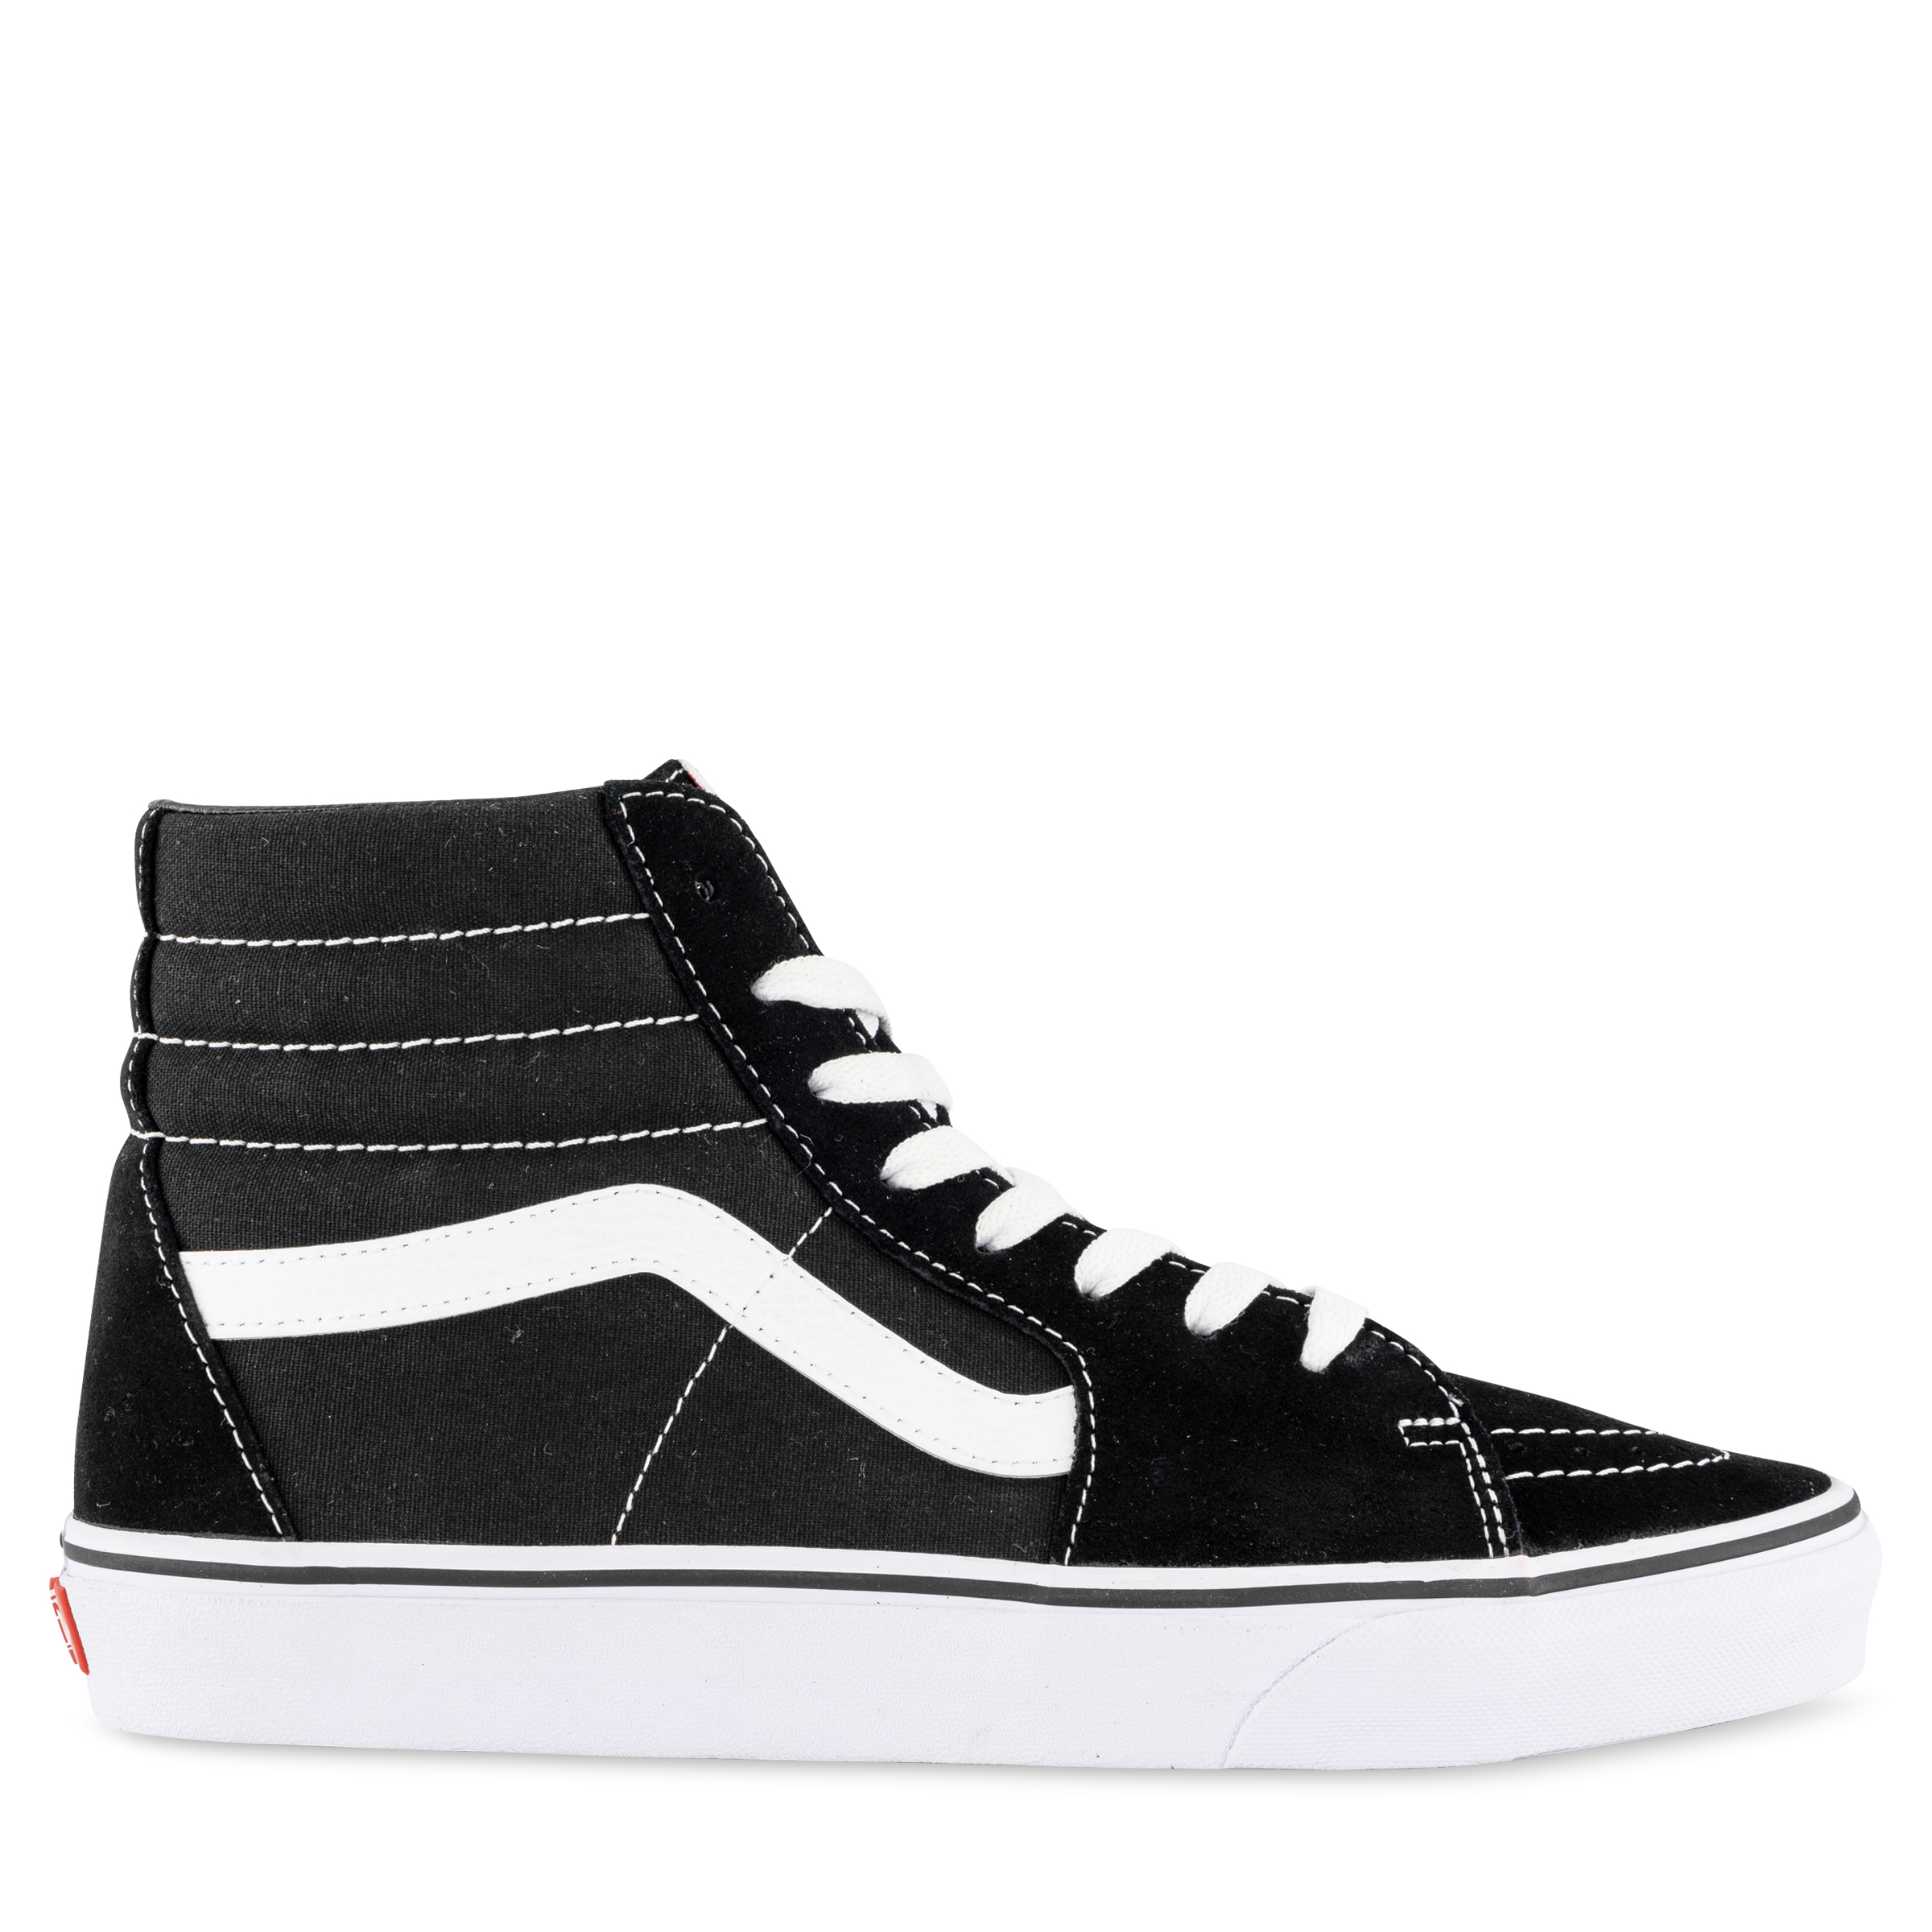 Vans Outlet: Sneakers Classic slip on in tela a scacchi - Nero ...